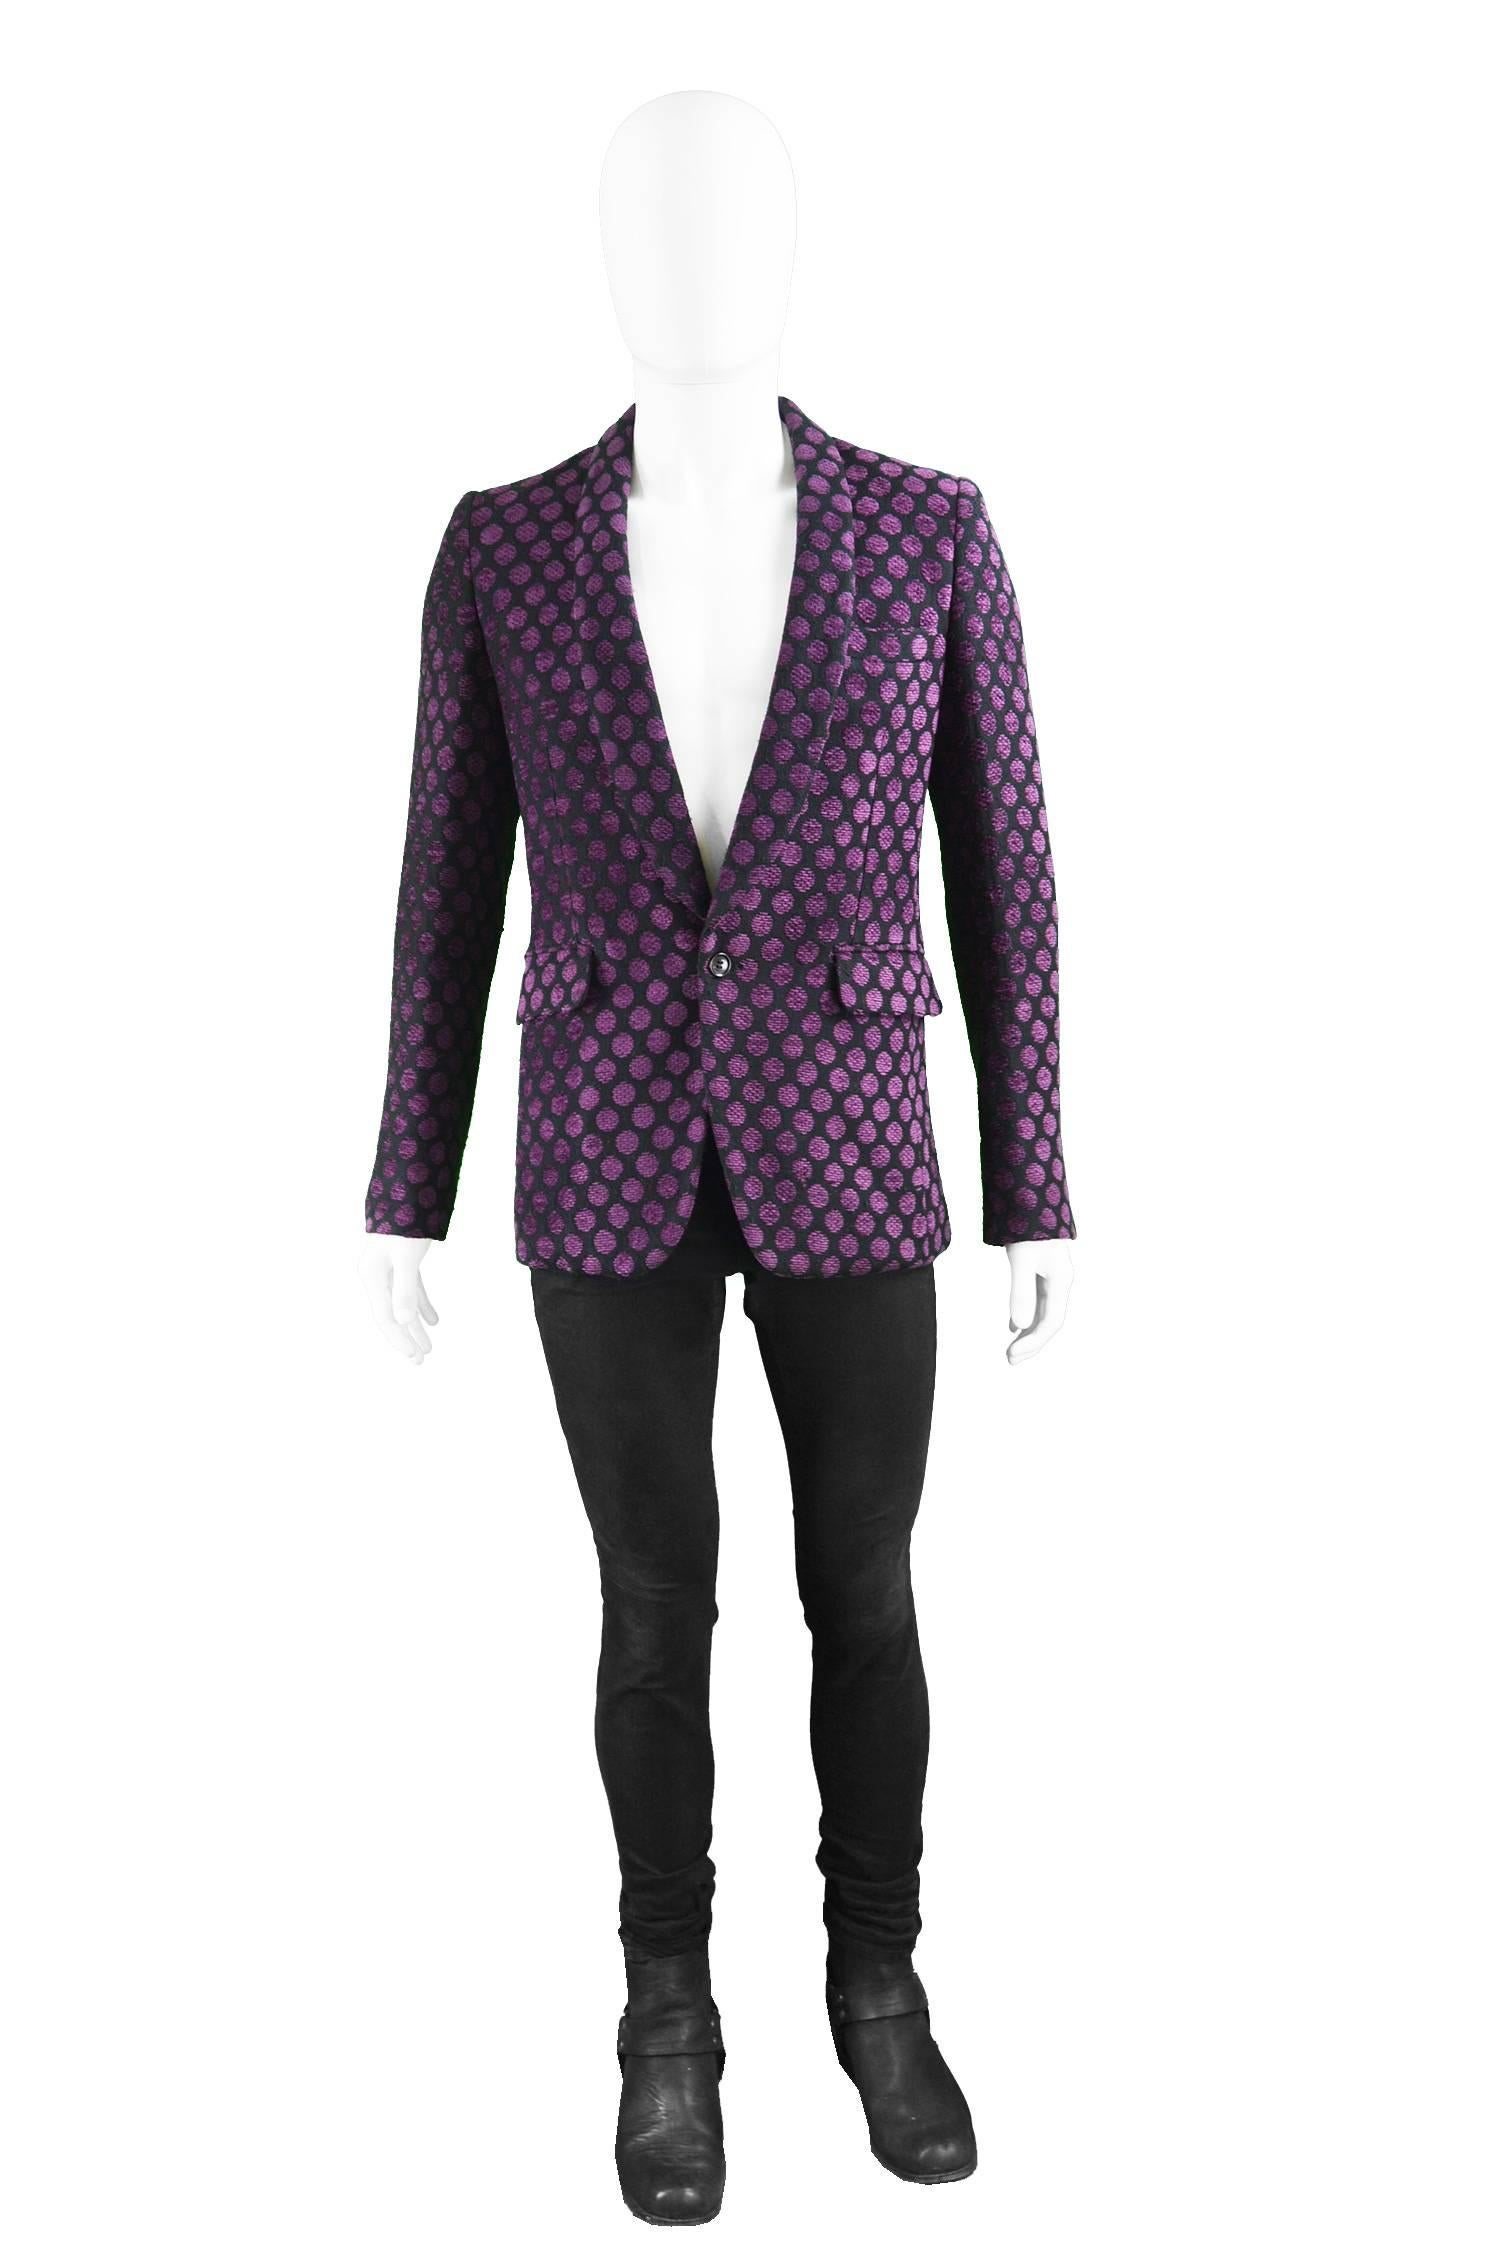 Comme Des Garcons Homme Plus Men's Woven Jacquard Polka Dot Blazer

Size: Marked S but this is a Japanese size and runs small, would probably best suit an XS. Check measurements.
Chest - 38” / 96cm (Please allow a couple of inches room for